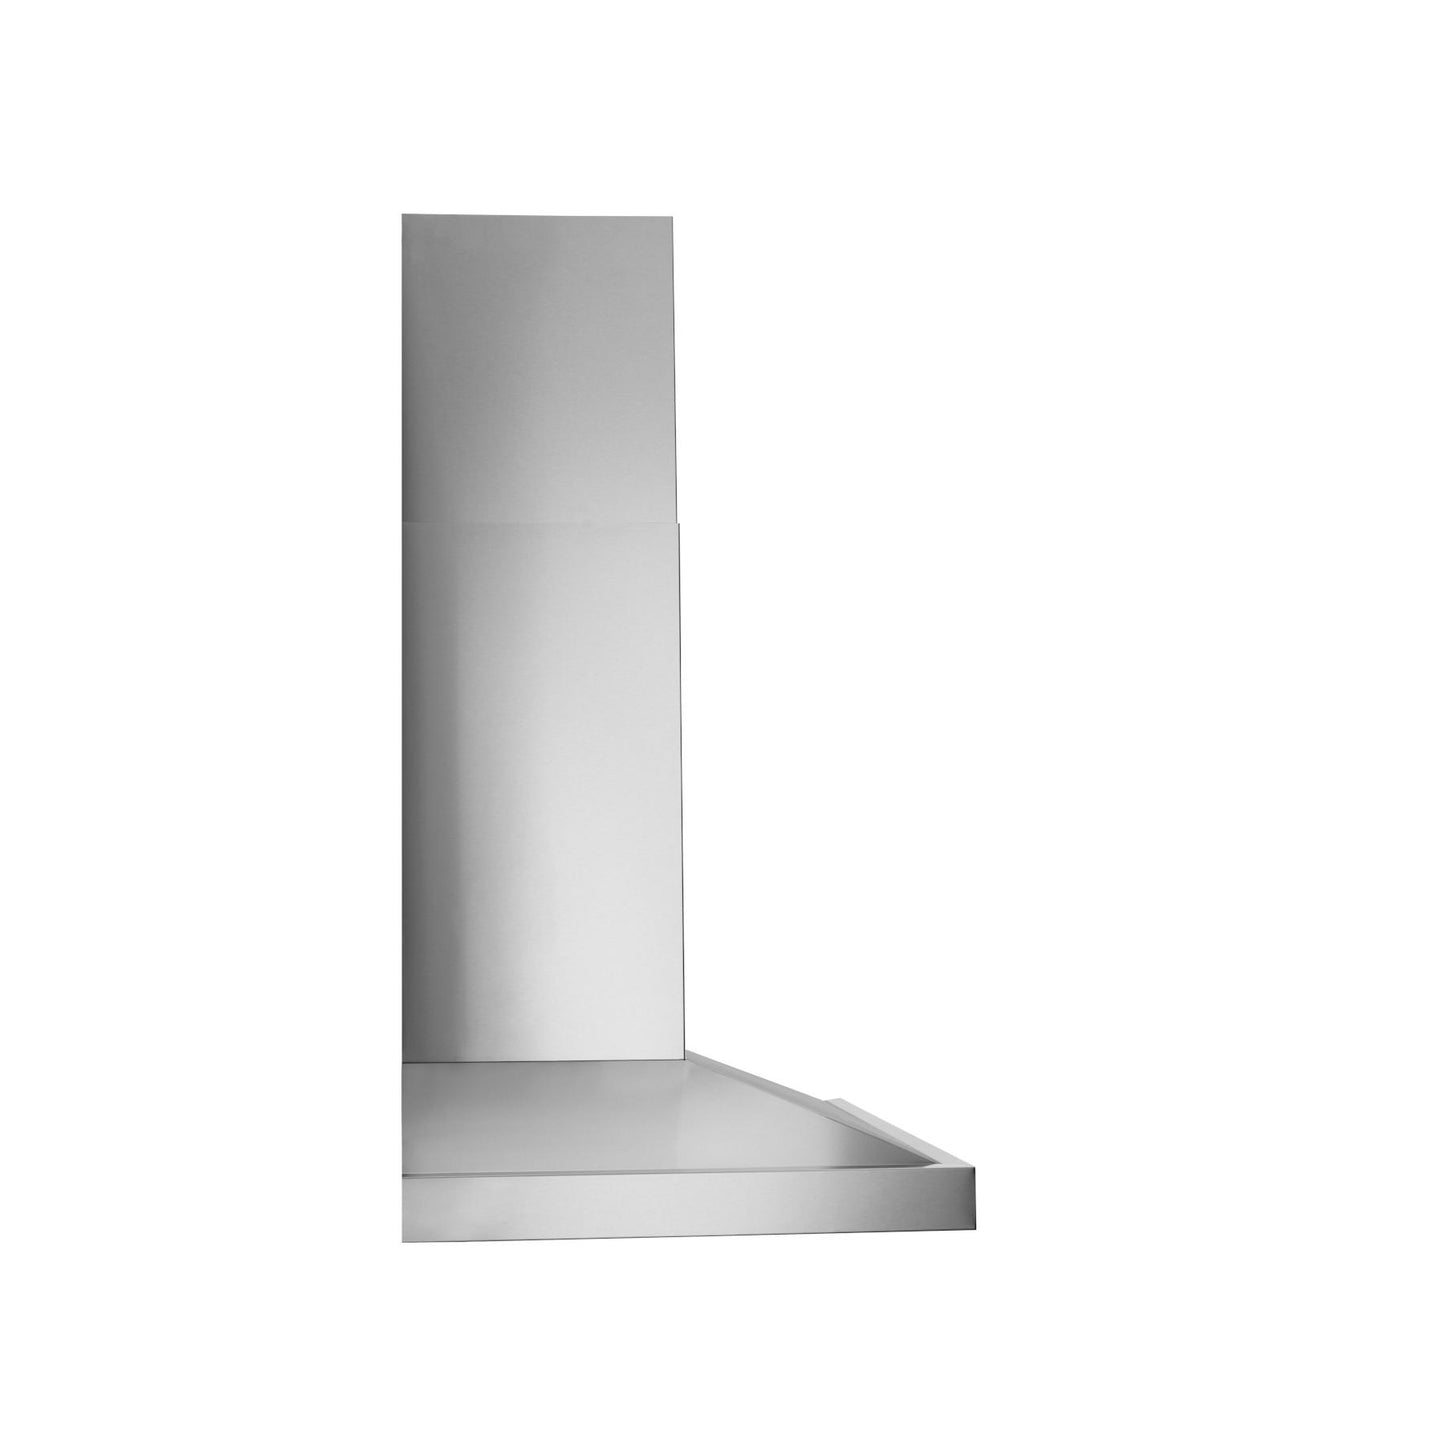 Best Range Hoods WCS1306SS 30-Inch Wall Mount Chimney Hood W/ Smartsense® And Voice Control, 650 Max Blower Cfm, Stainless Steel (Wcs1 Series)